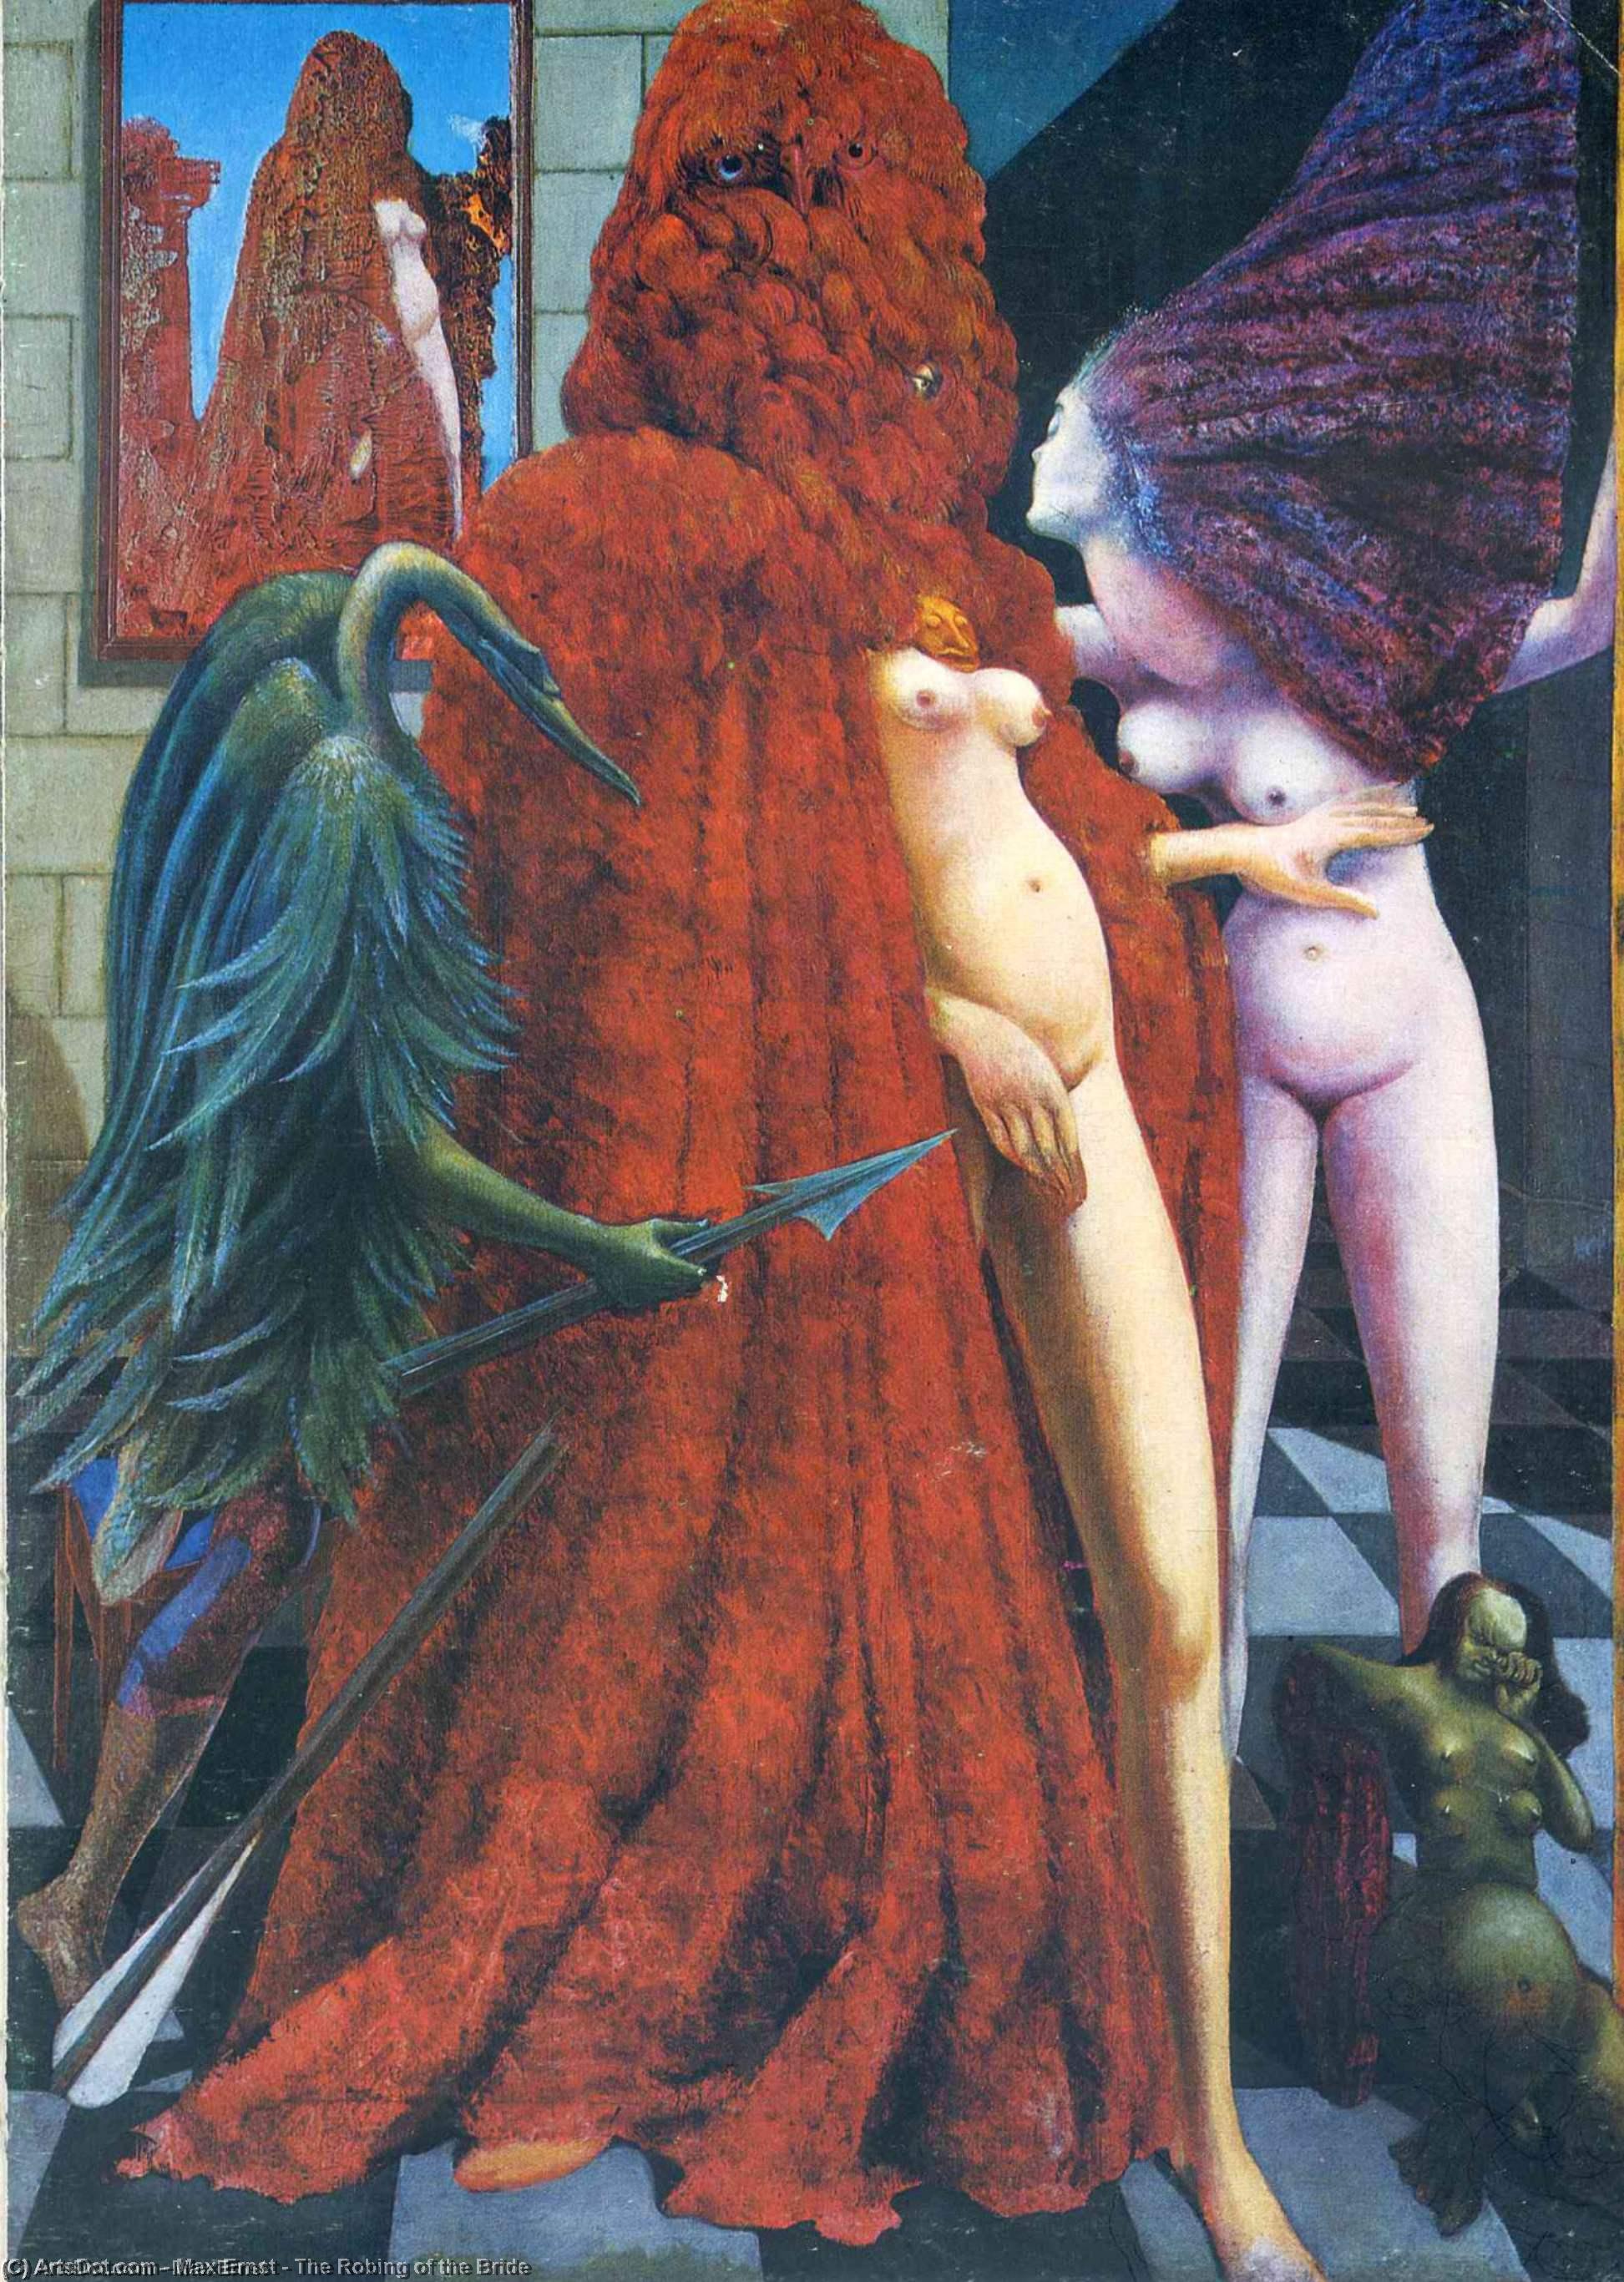 WikiOO.org - Encyclopedia of Fine Arts - Maalaus, taideteos Max Ernst - The Robing of the Bride